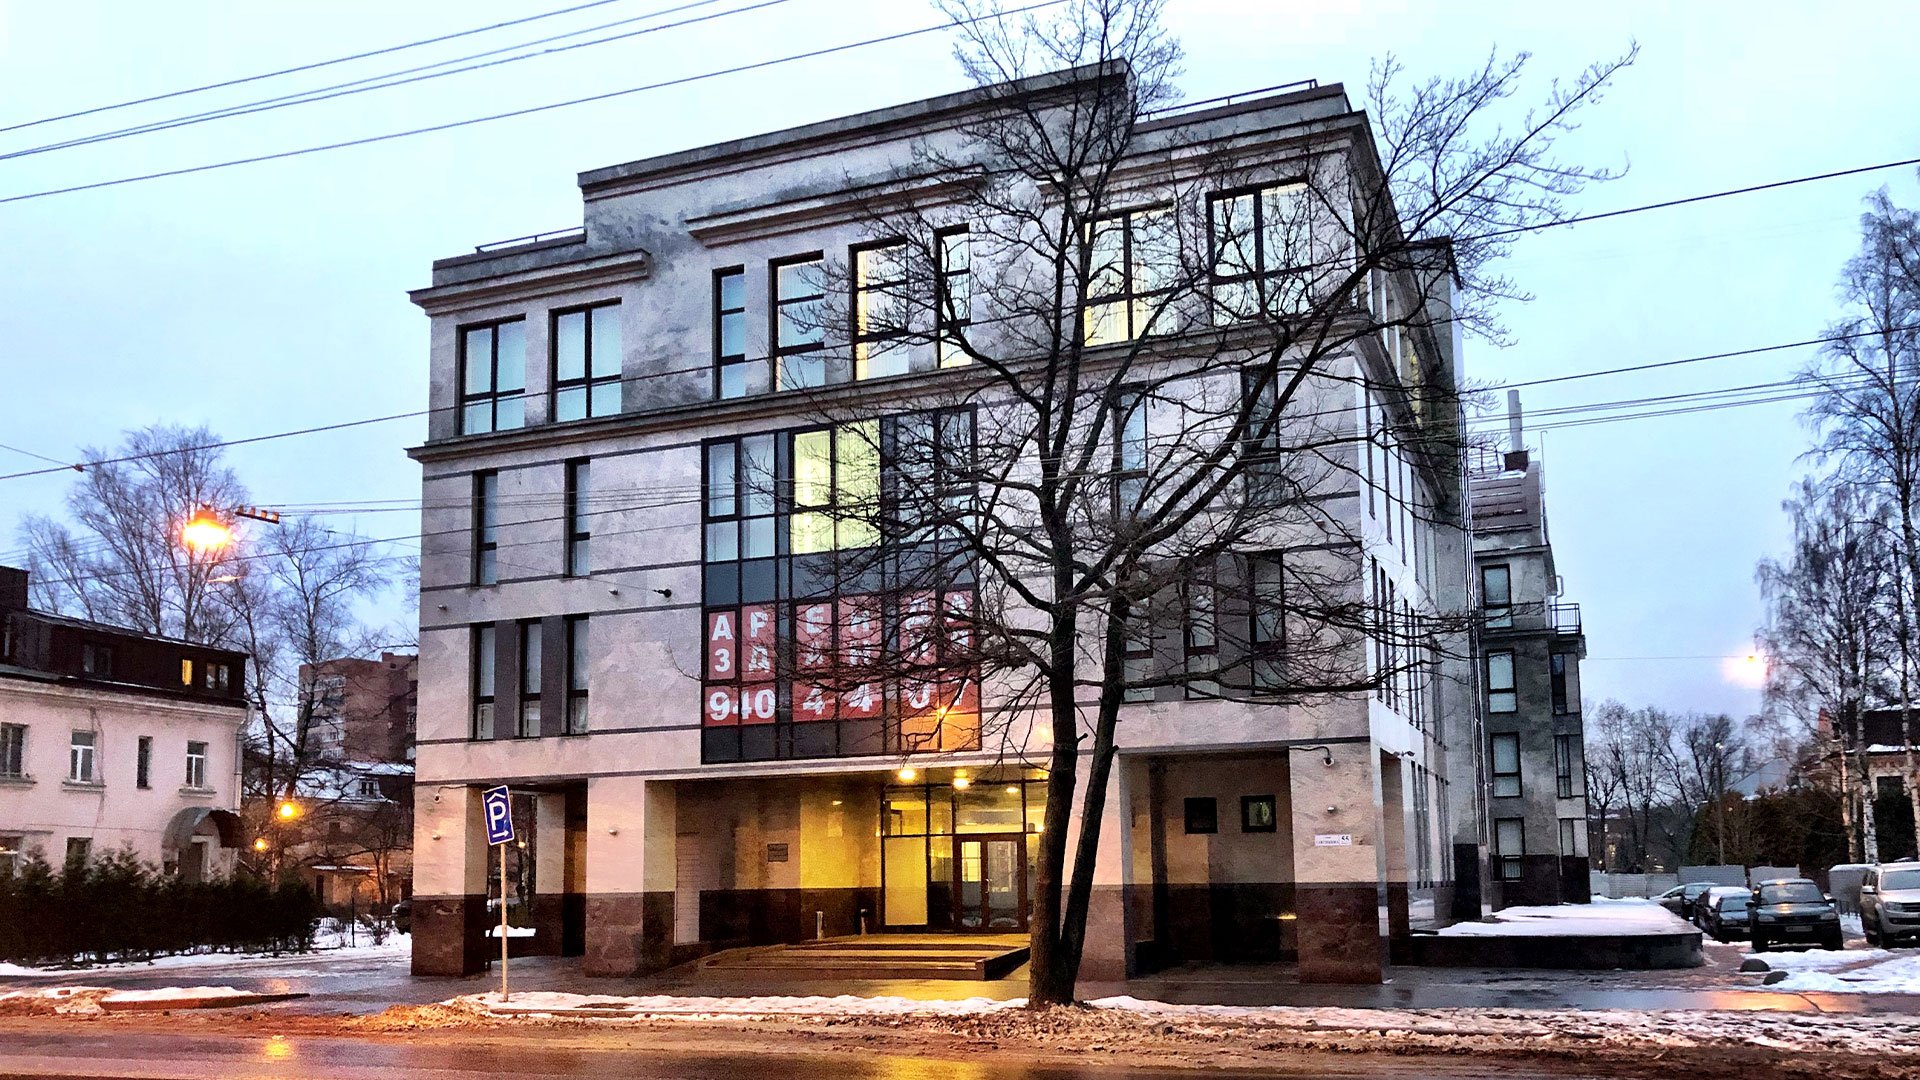 One of the offices at 55 Savushkina Street in Saint Petersburg, Russia